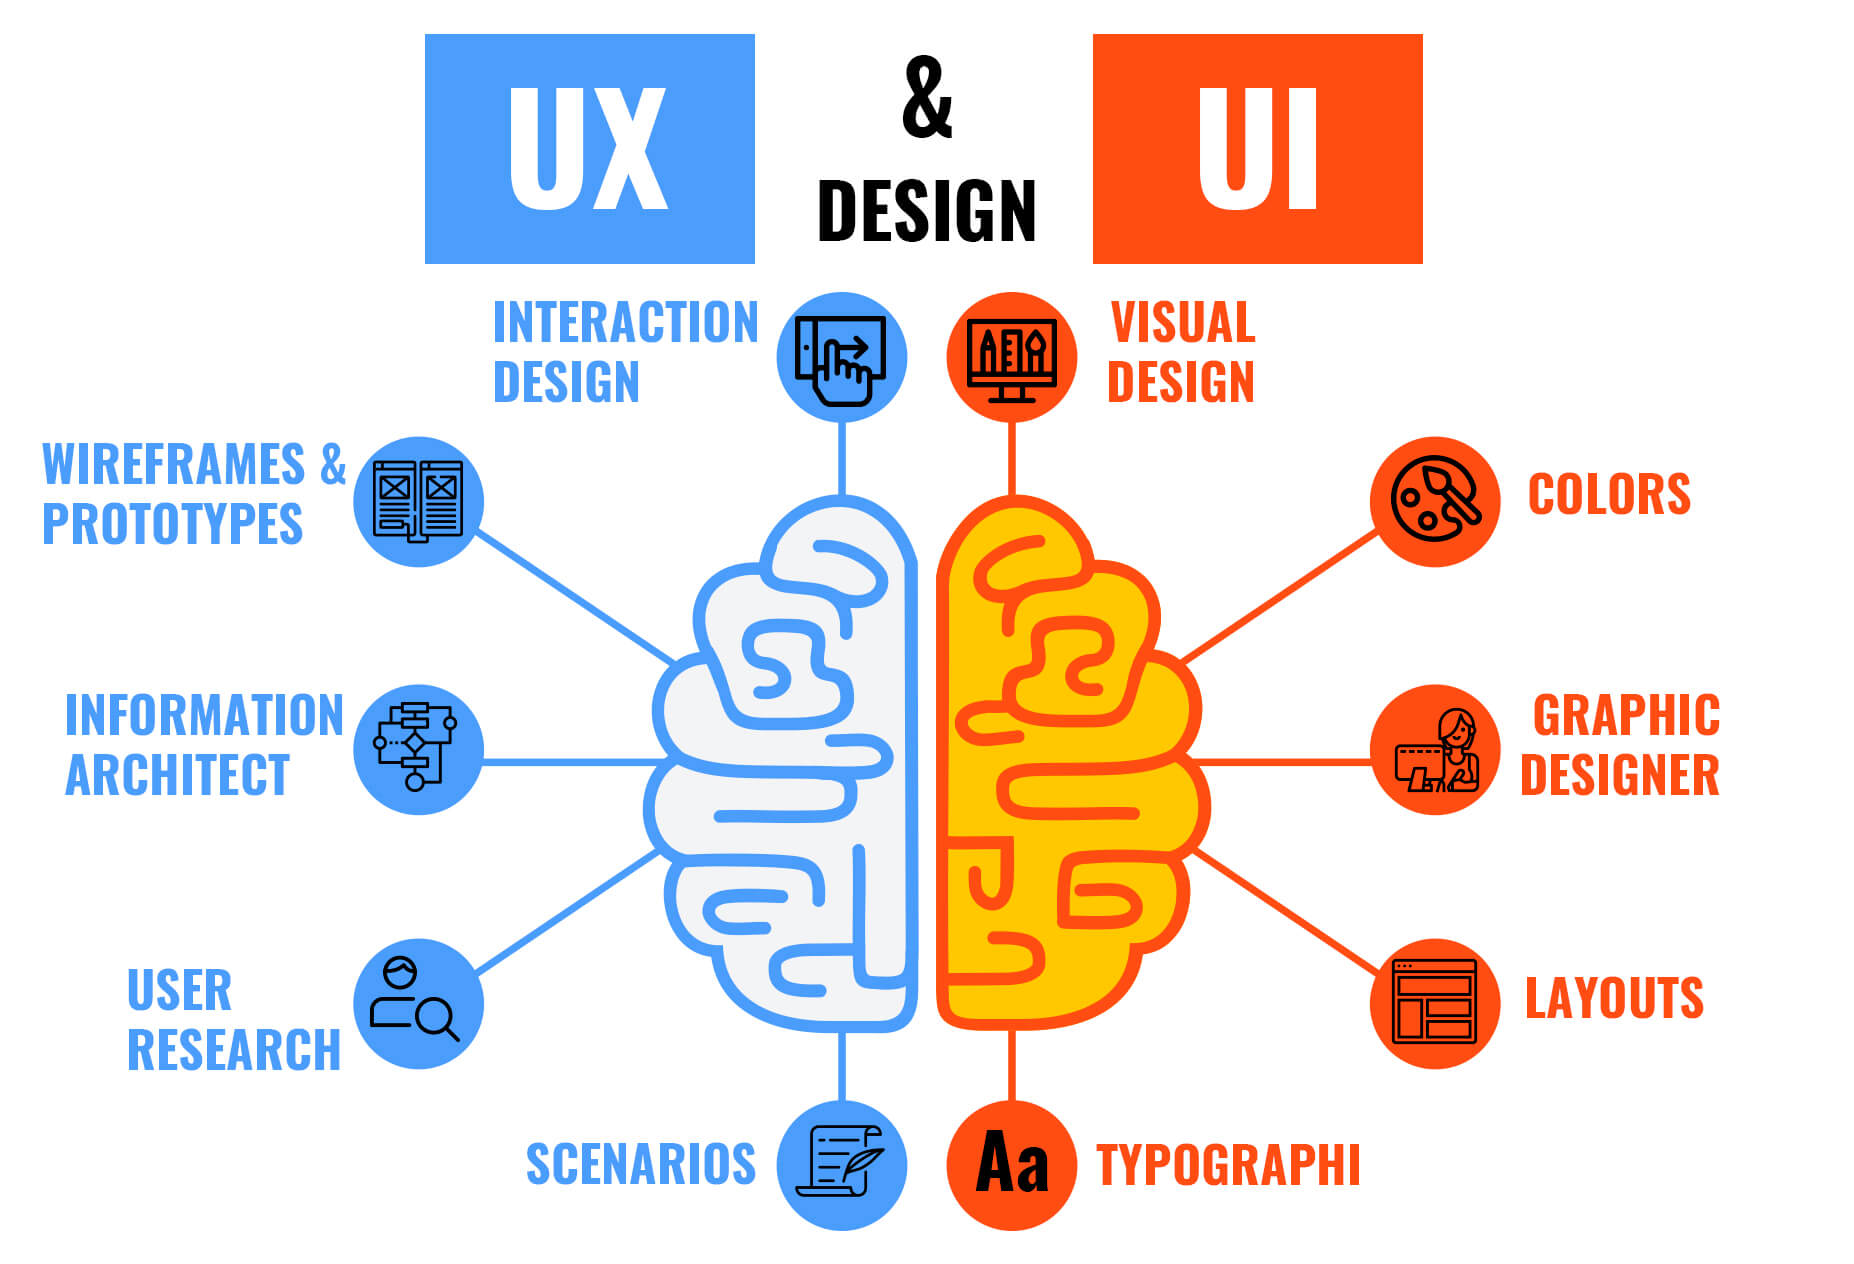 The key difference between UI and UX is that one is about how things look and the other is about how they feel.